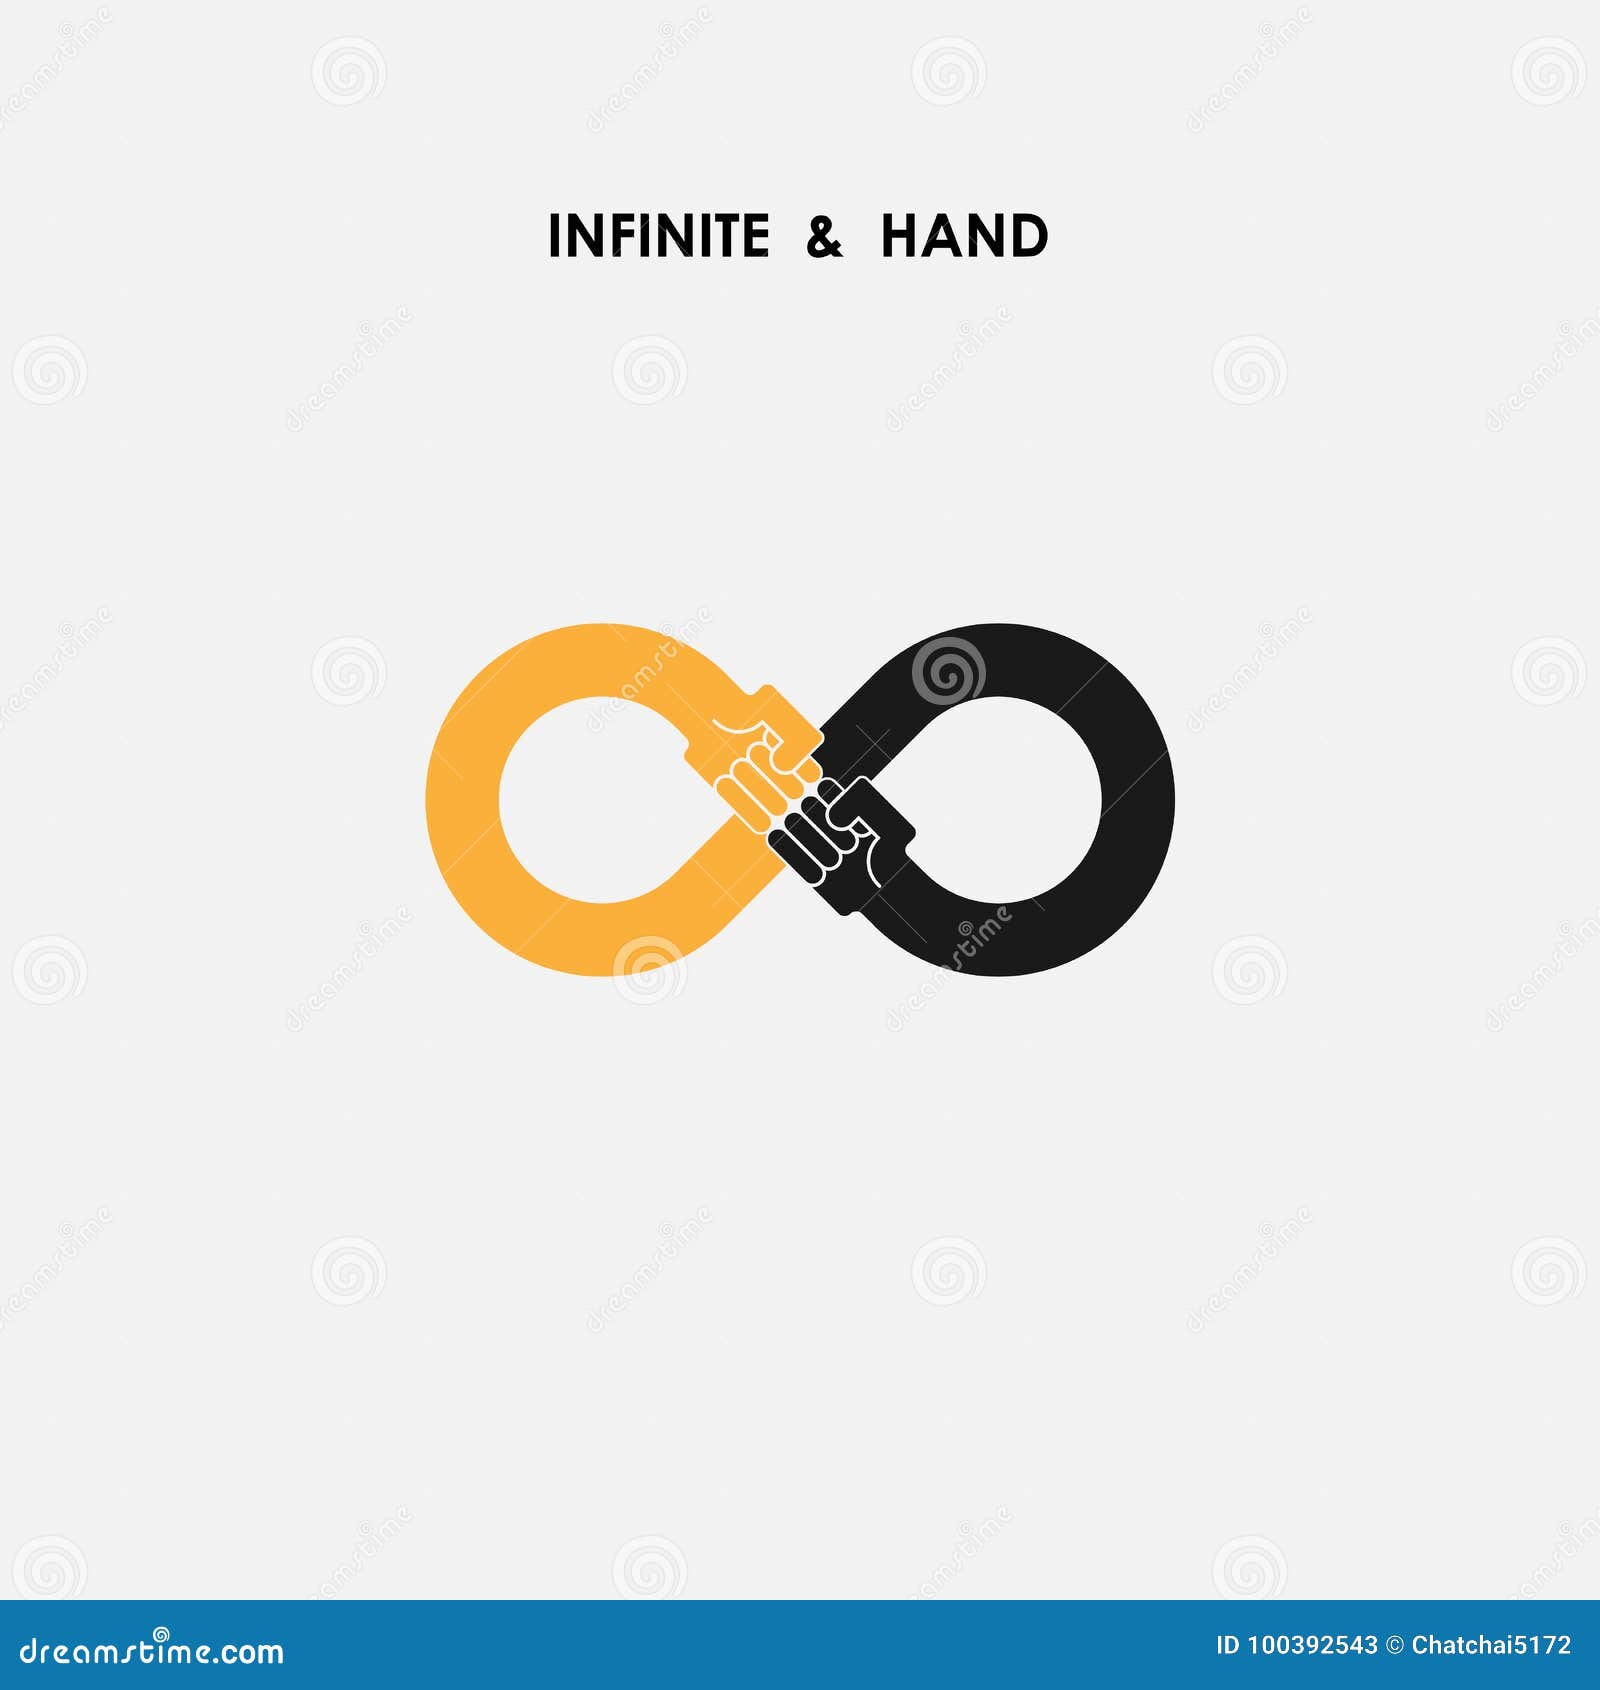 hand sign and infinite logo s .infinity and fist